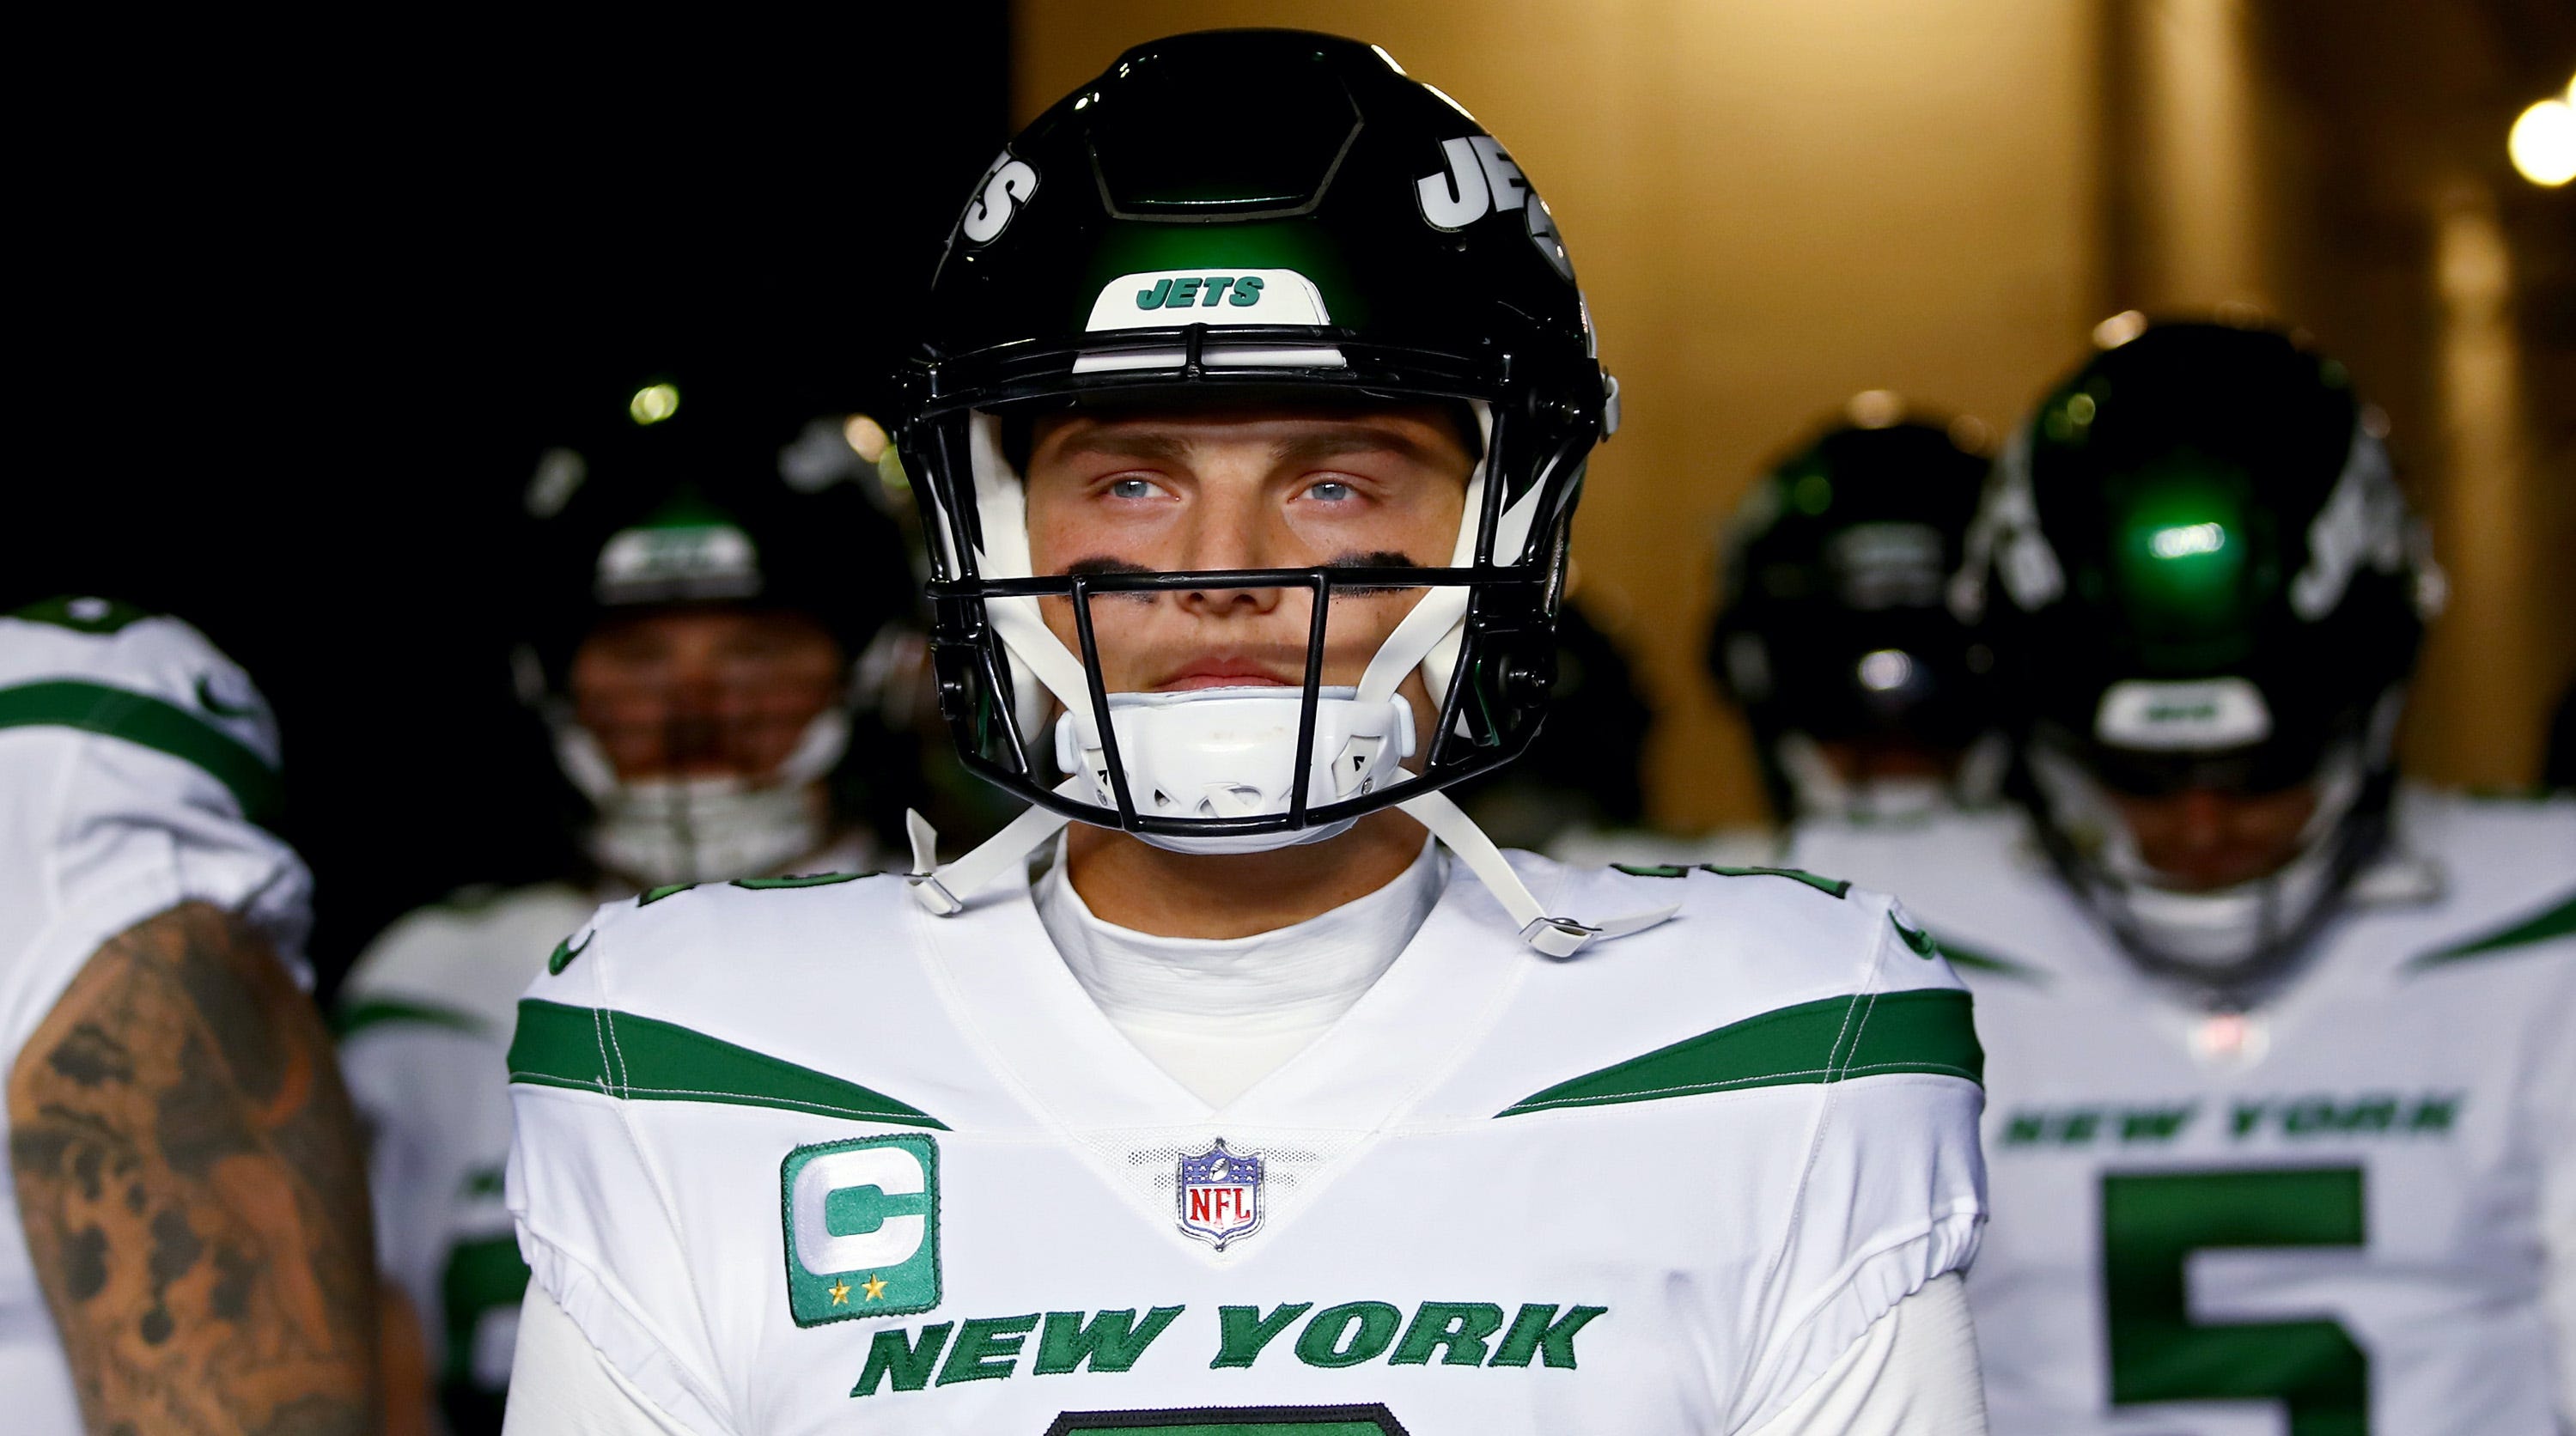 3 keys to Zach Wilson, Jets beating the Detroit Lions